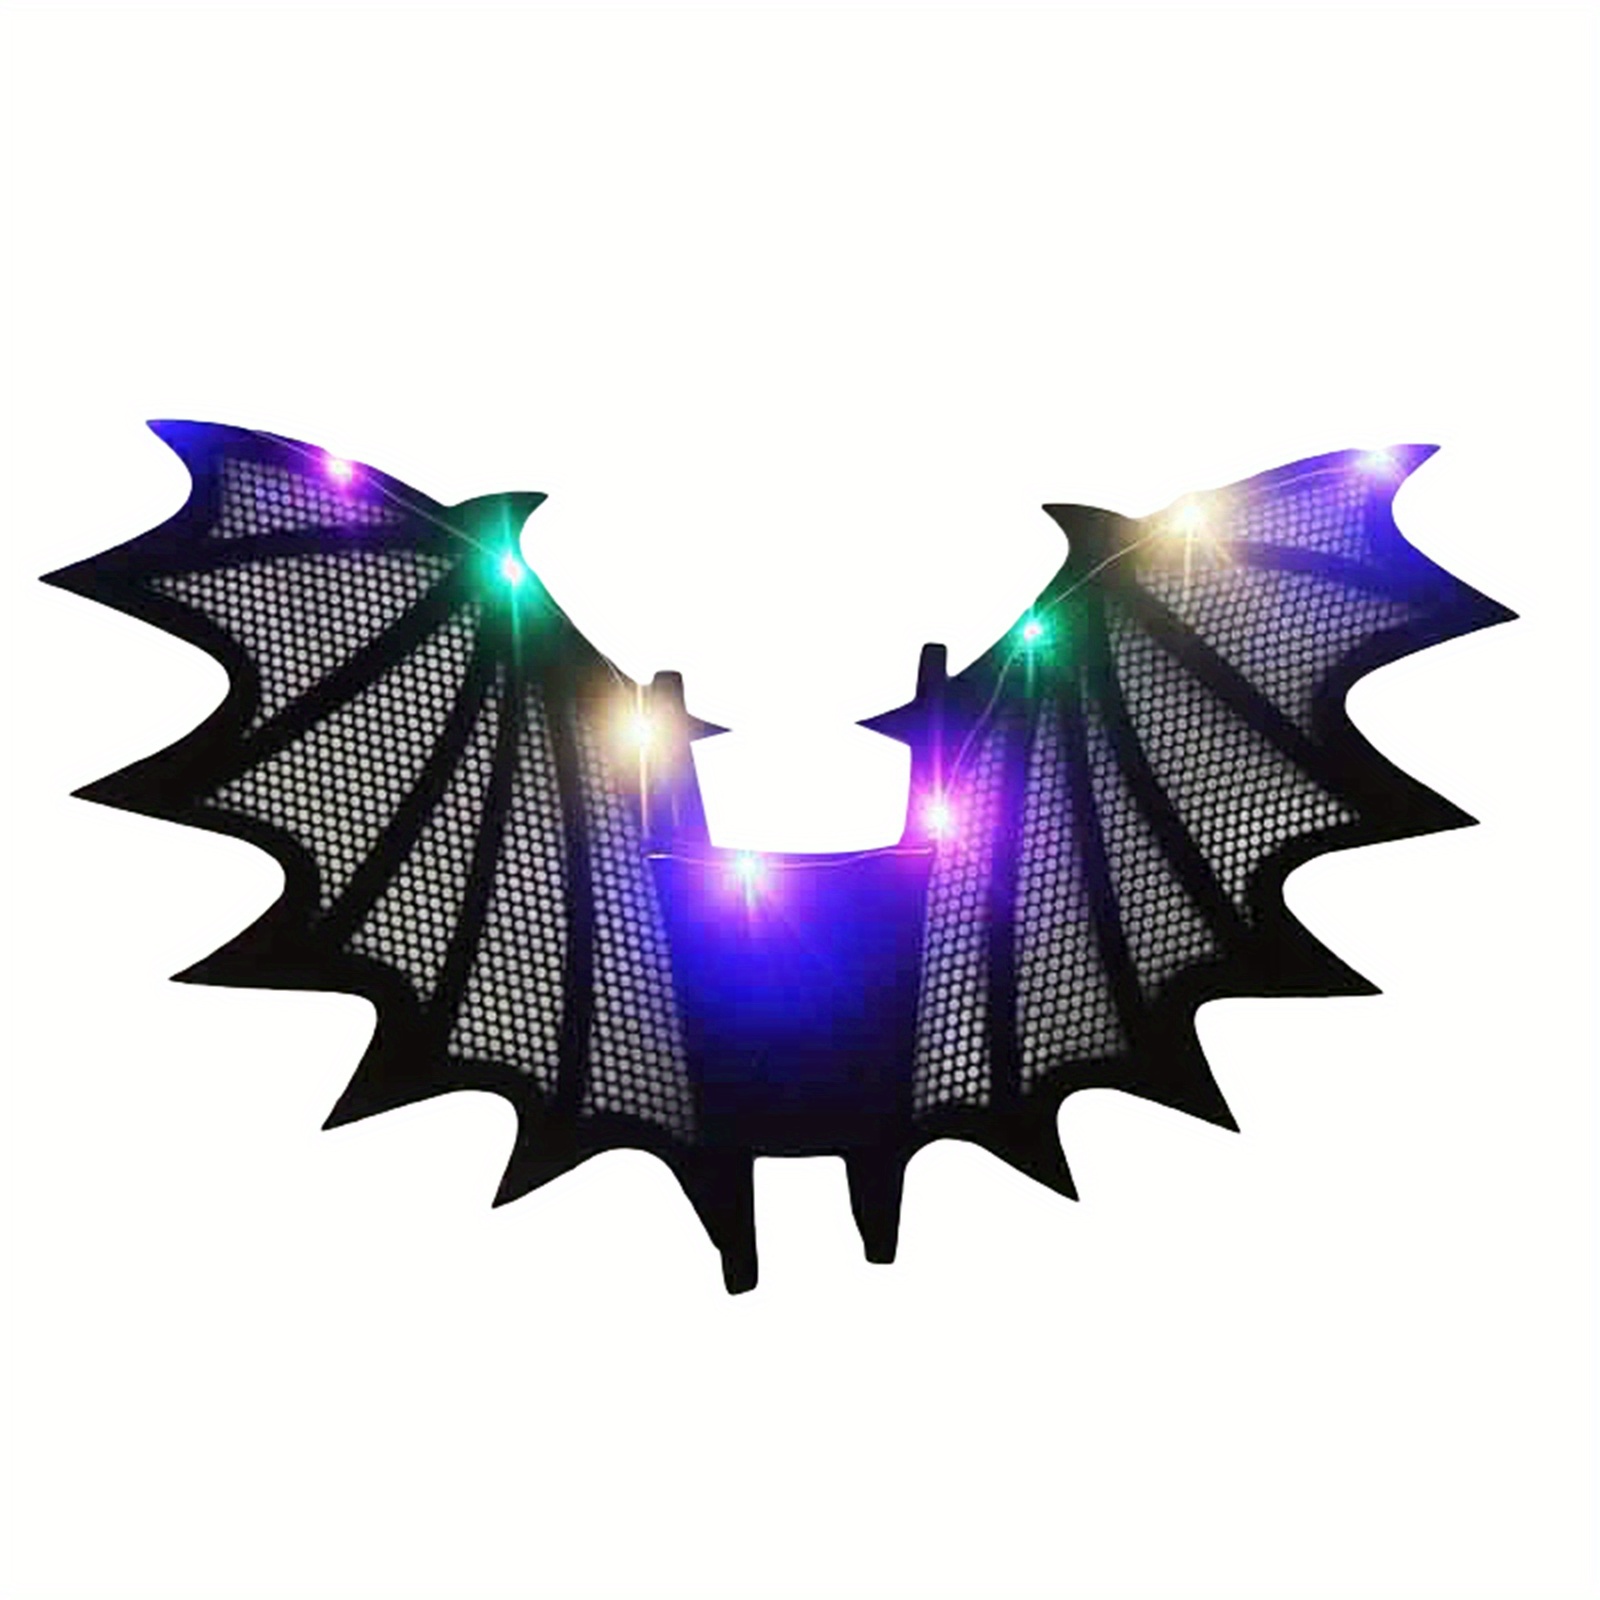 

Halloween Bat Wings With Led Lights Costume For Halloween Party, Spider Wings With Light String Halloween Costume Accessory